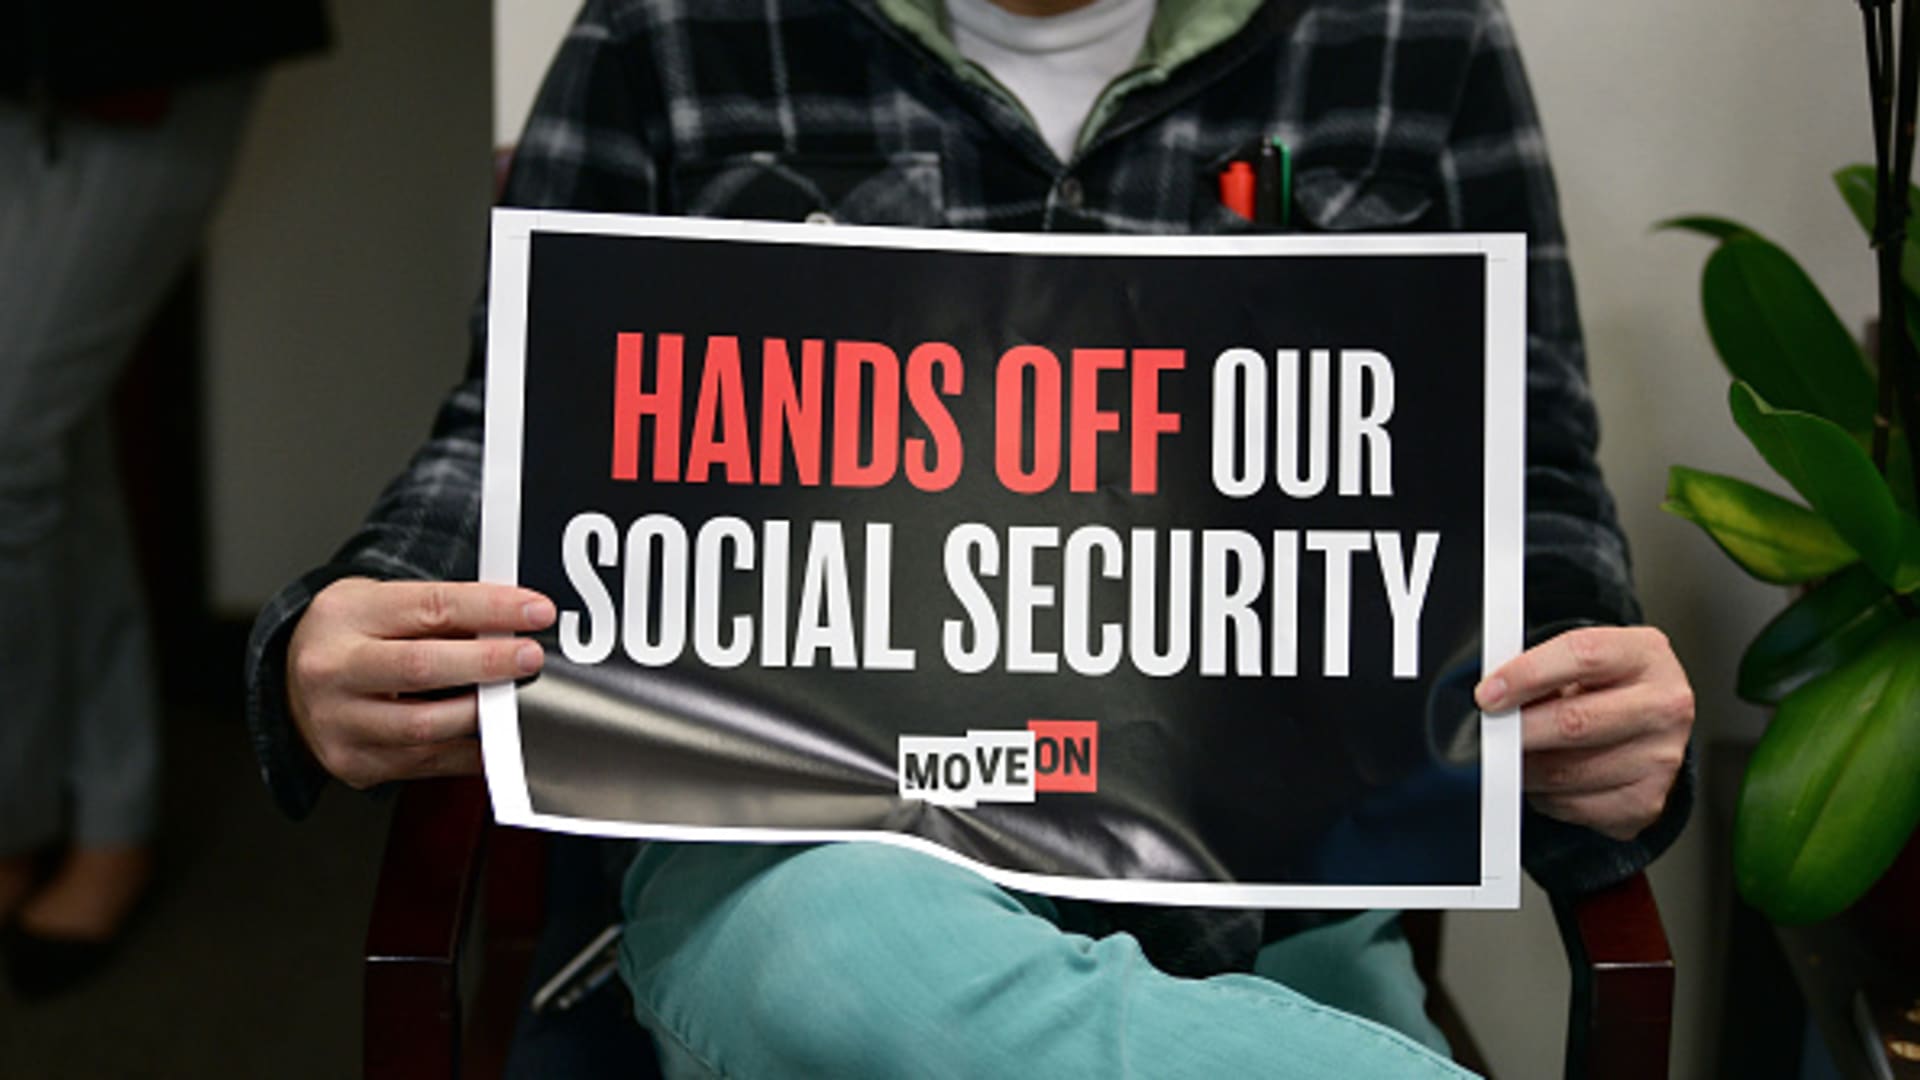 Public workers may receive reduced Social Security benefits. There’s growing support in Congress to change that